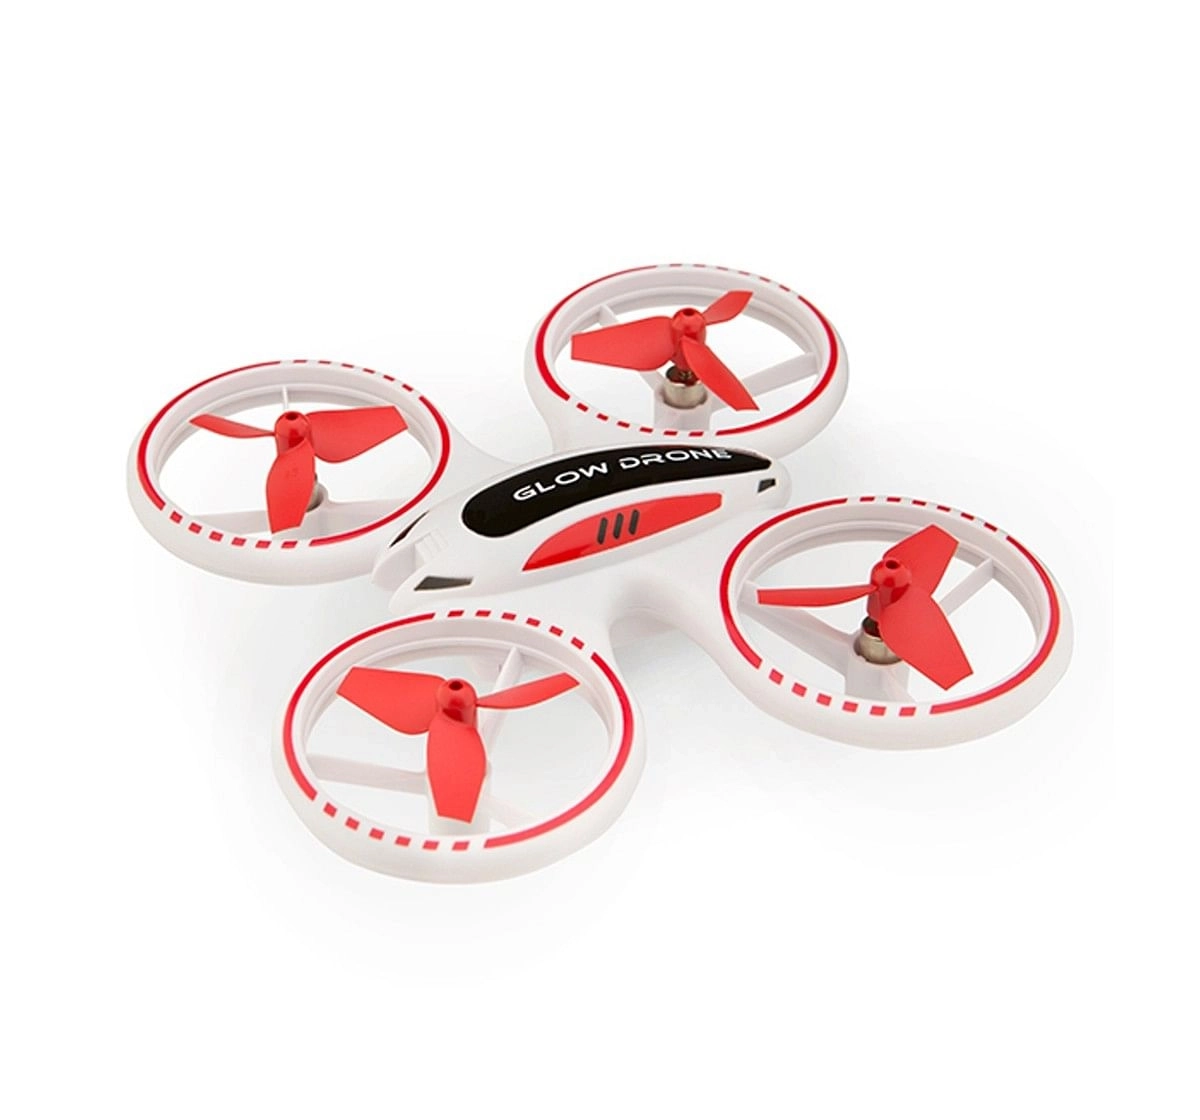 Kids Drone at Rs 1100, Kids Toy Drone in Noida